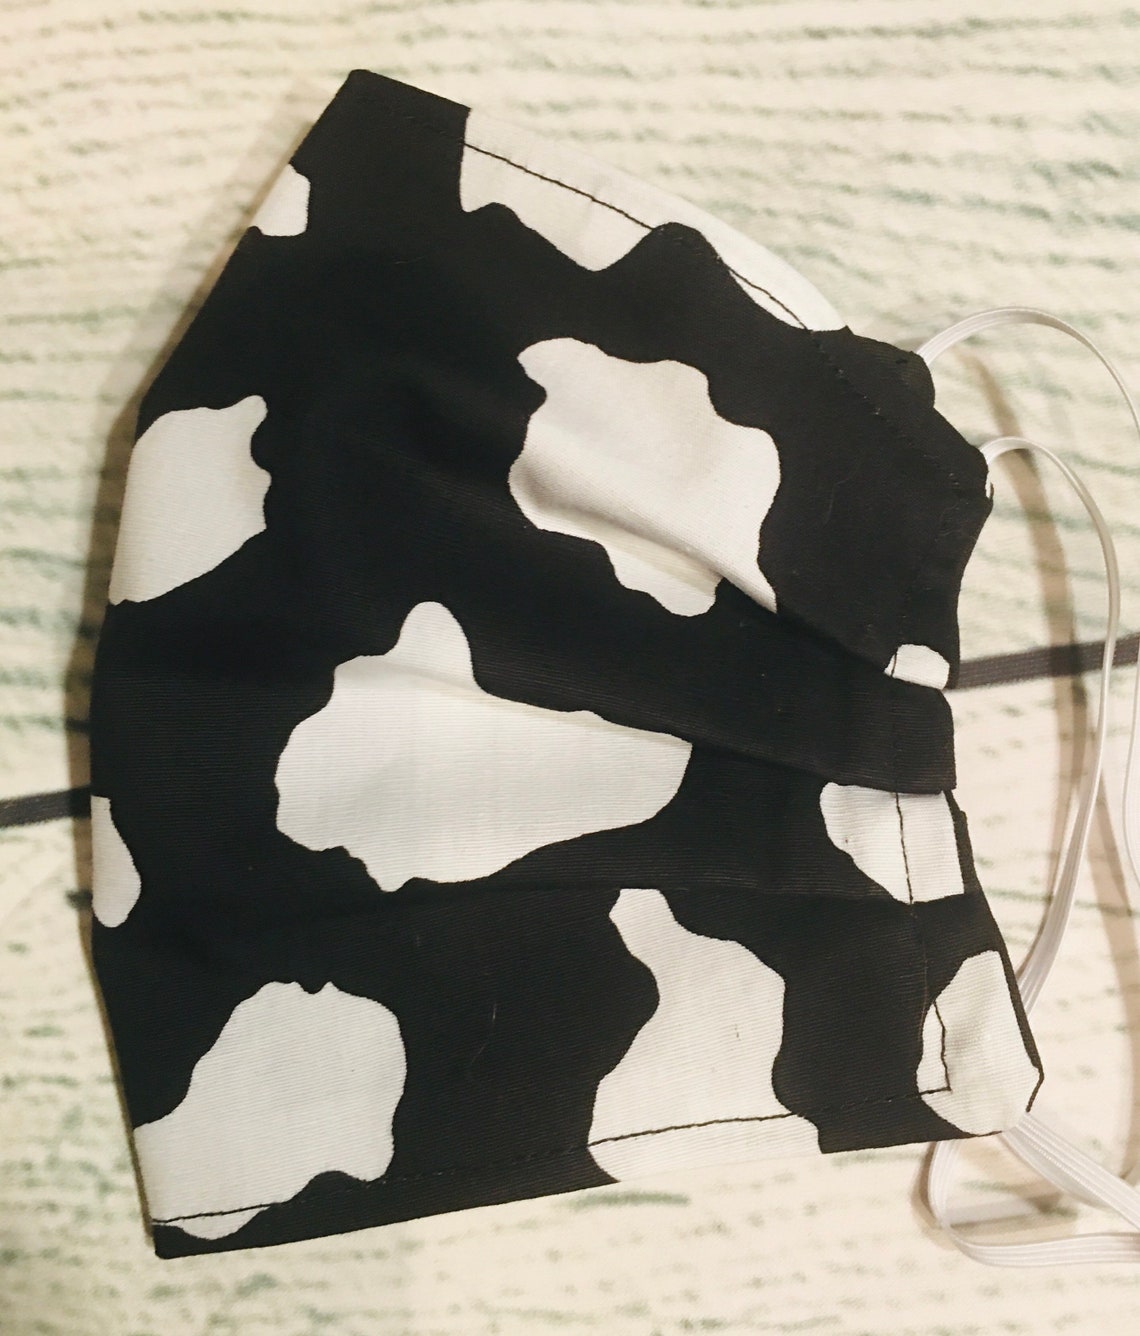 Cow Print Face Mask Adult or Child Size. 100% Cotton. | Etsy